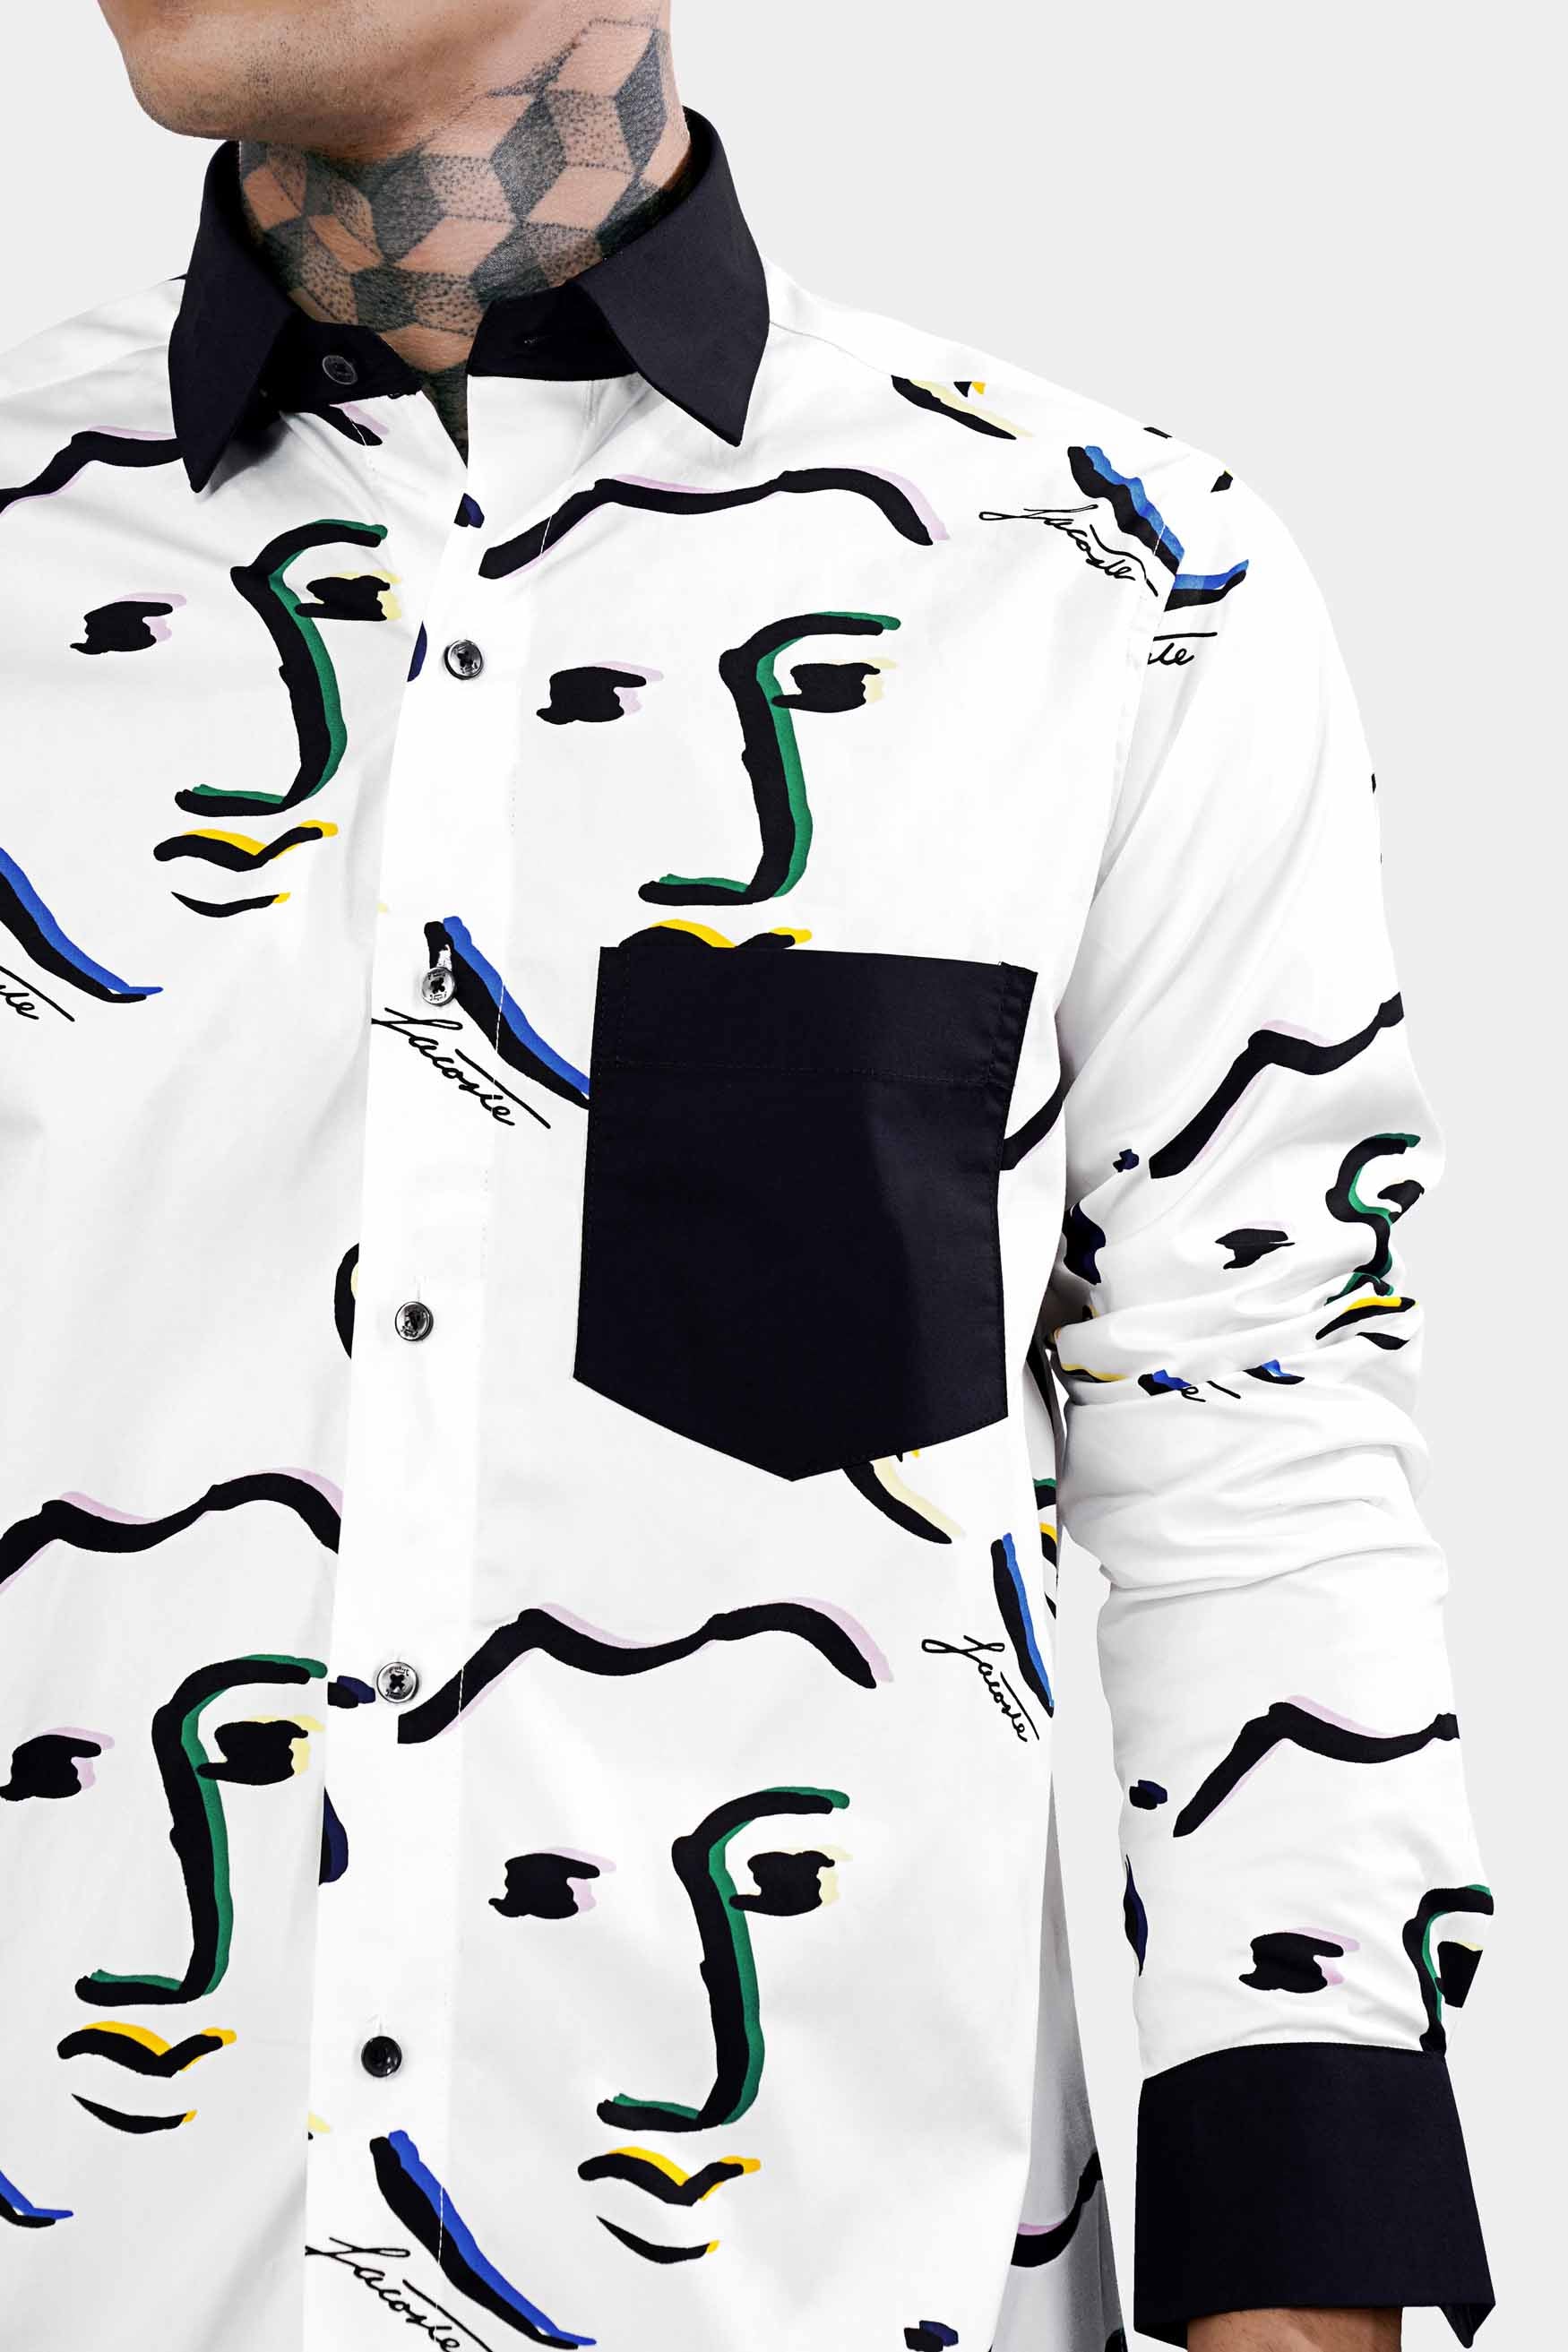 Bright White Faces Printed with Black Cuffs and Collar Premium Cotton Shirt 11433-BCC-BLK-38, 11433-BCC-BLK-H-38, 11433-BCC-BLK-39, 11433-BCC-BLK-H-39, 11433-BCC-BLK-40, 11433-BCC-BLK-H-40, 11433-BCC-BLK-42, 11433-BCC-BLK-H-42, 11433-BCC-BLK-44, 11433-BCC-BLK-H-44, 11433-BCC-BLK-46, 11433-BCC-BLK-H-46, 11433-BCC-BLK-48, 11433-BCC-BLK-H-48, 11433-BCC-BLK-50, 11433-BCC-BLK-H-50, 11433-BCC-BLK-52, 11433-BCC-BLK-H-52